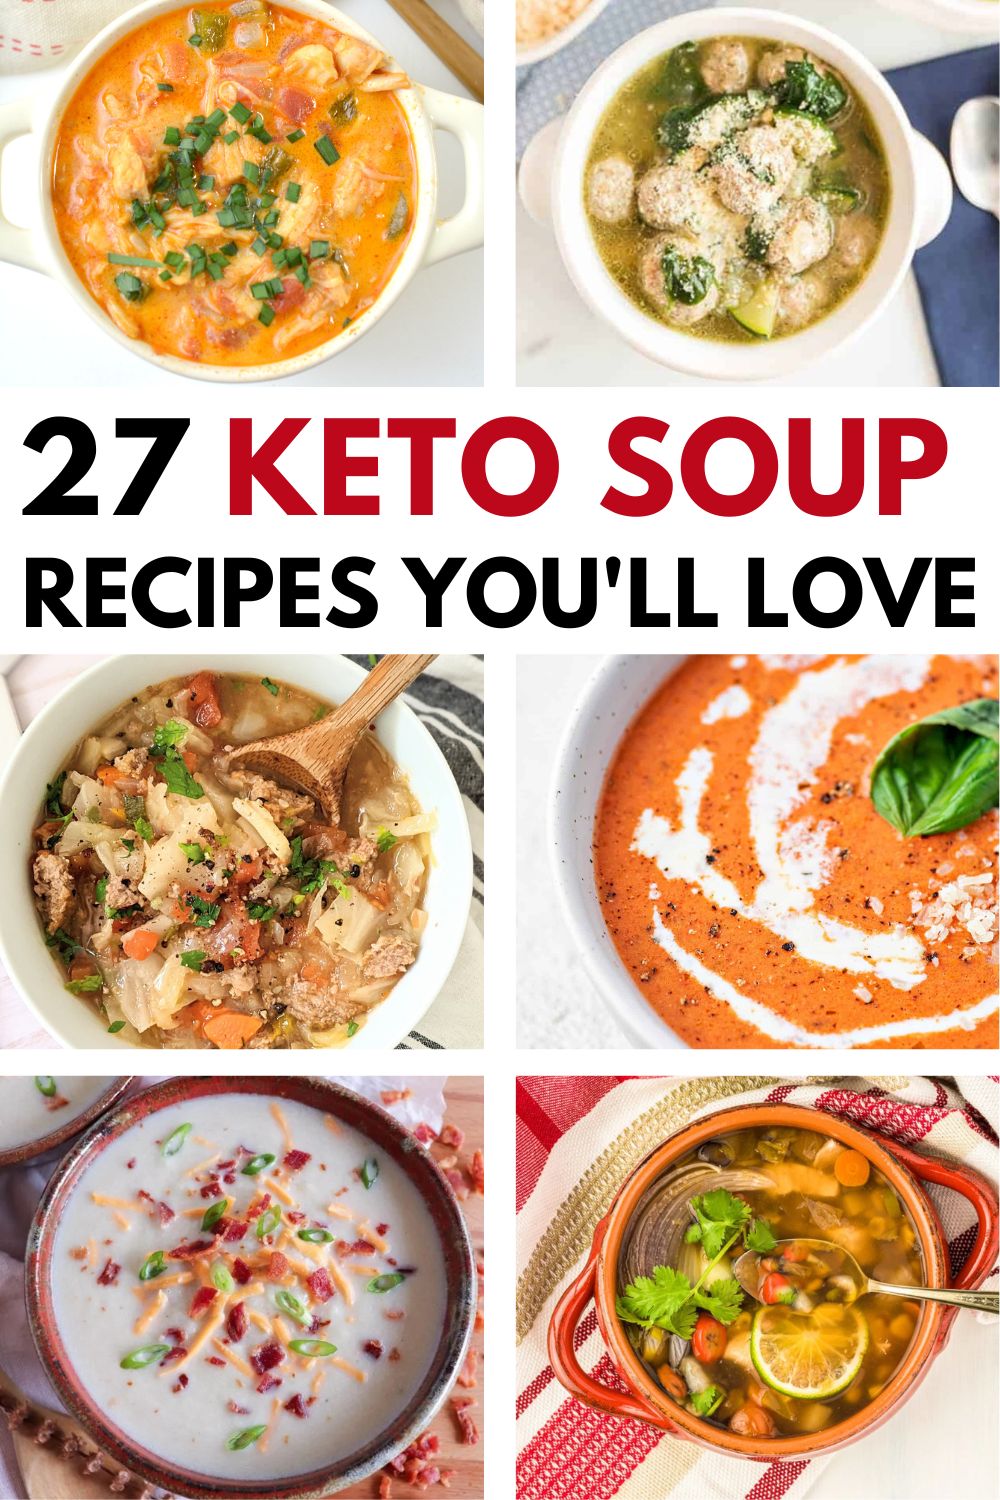 collage of 6 different soups with caption 27 keto soup recipes you'll love.